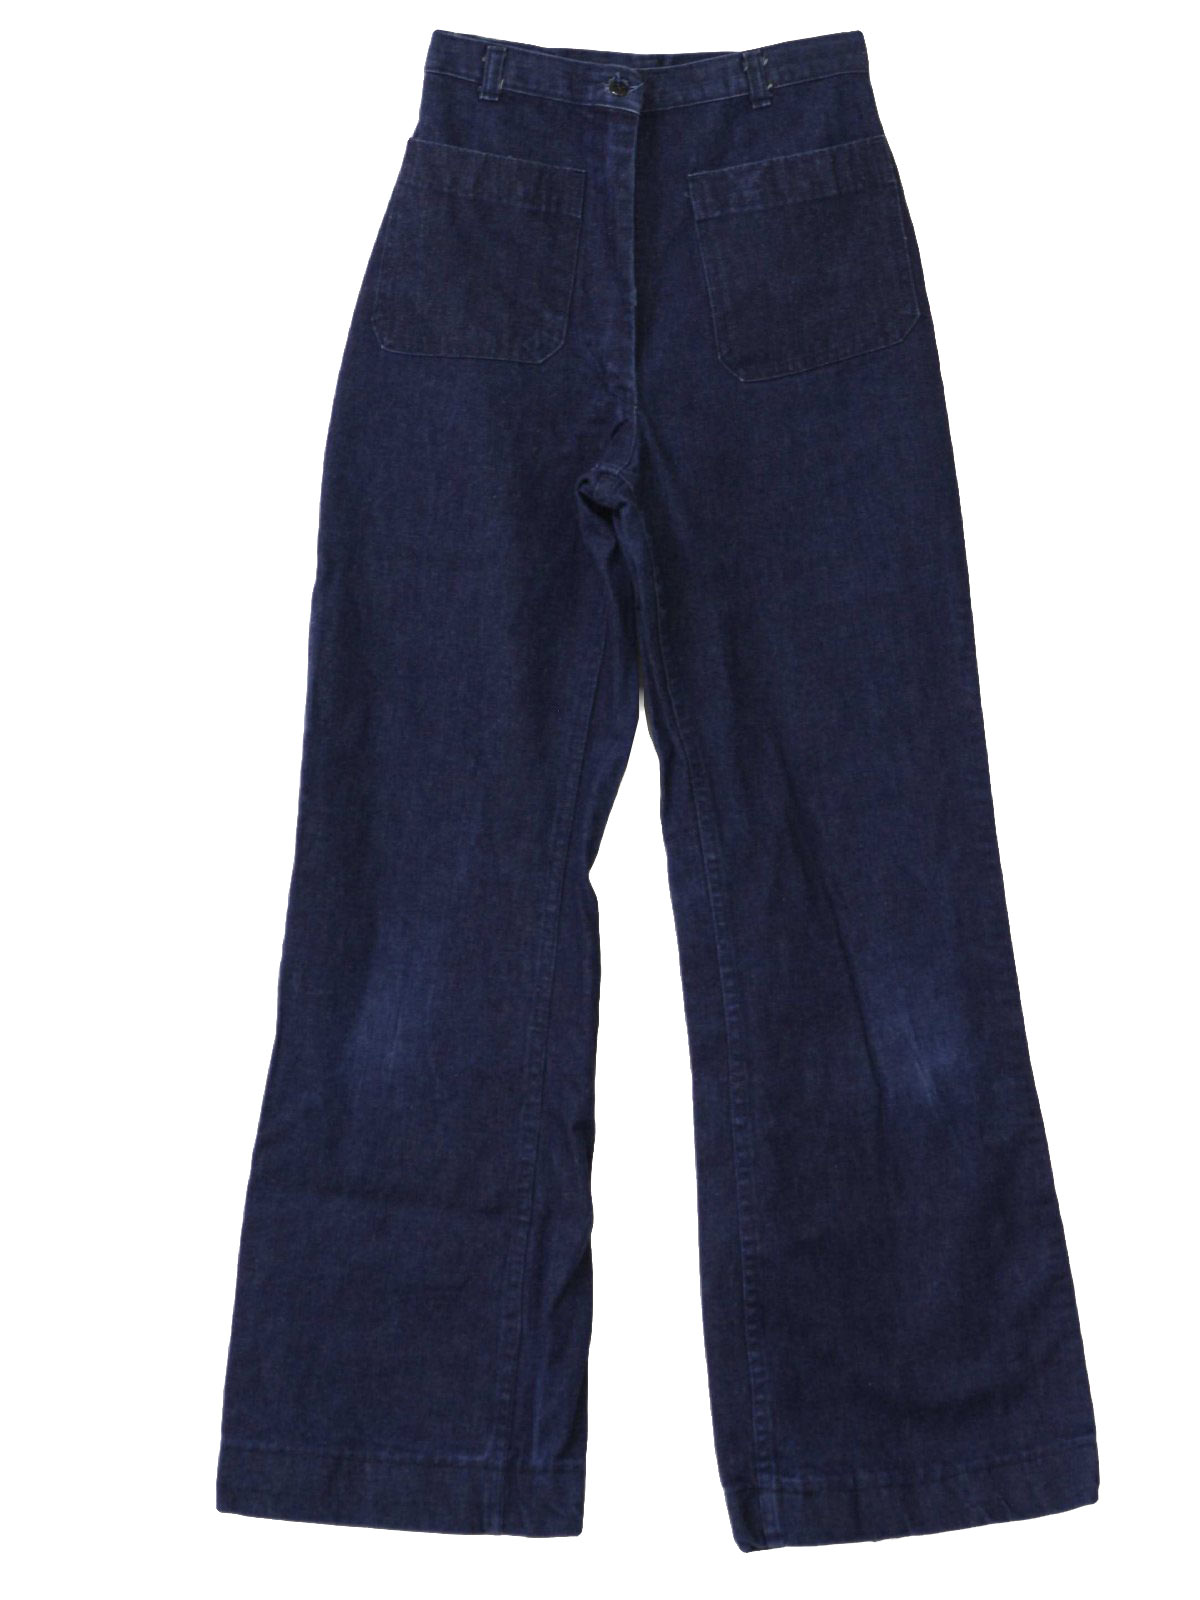 Utility Trousers Sixties Vintage Bellbottom Pants: 60s -Utility ...